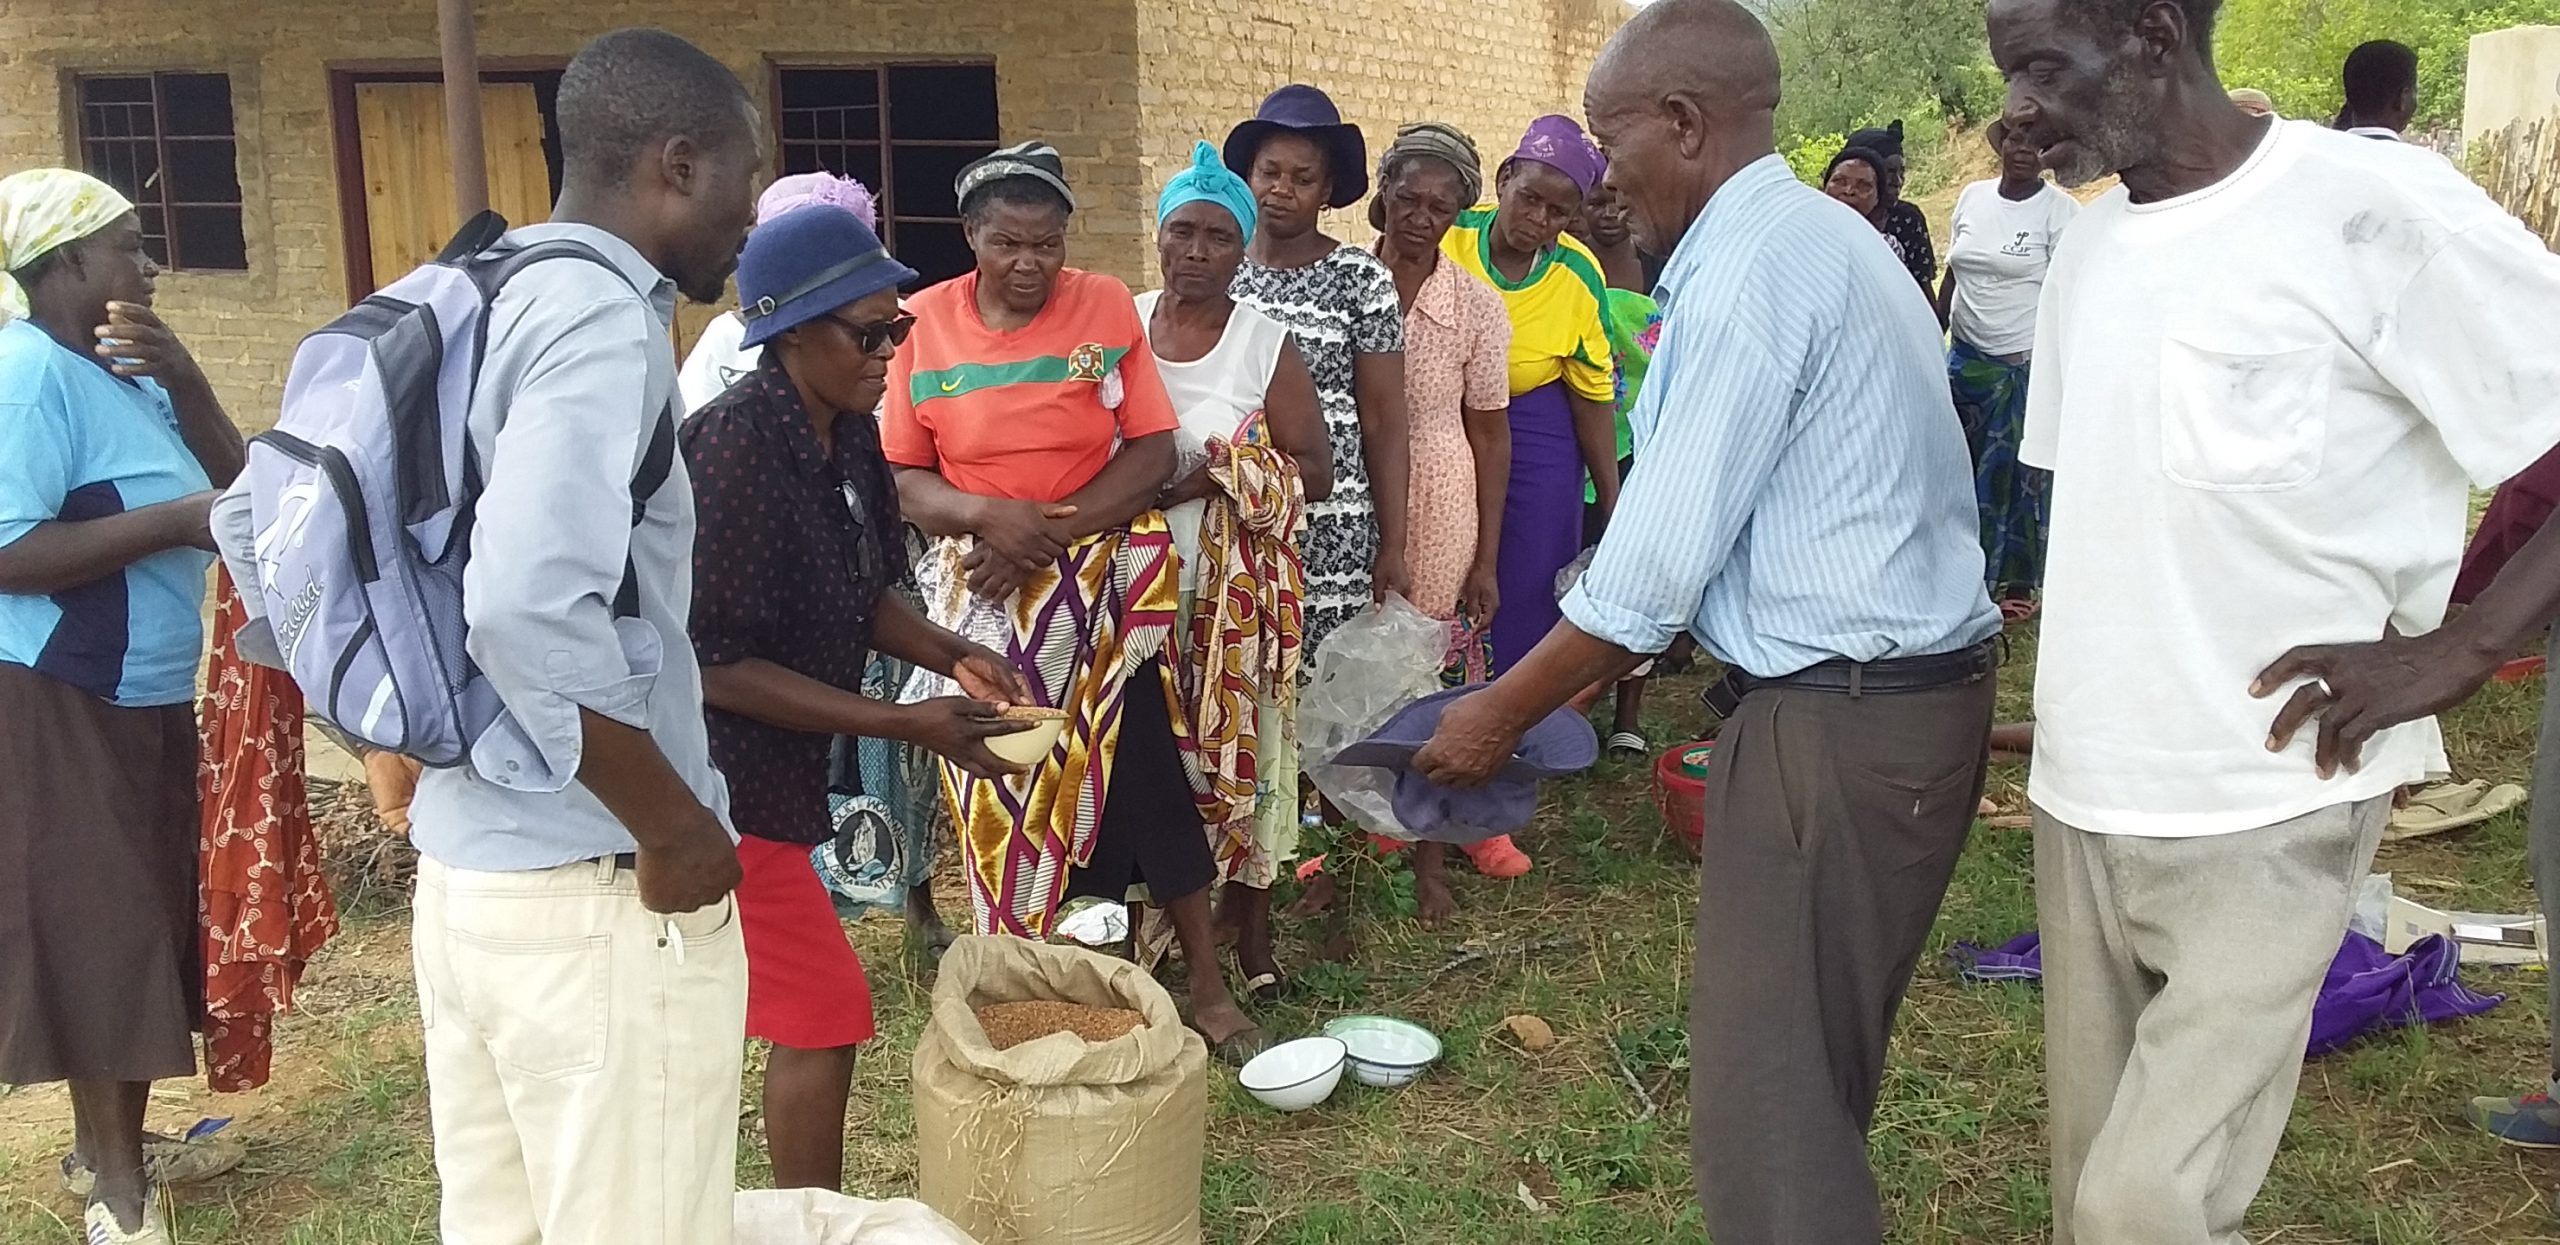 Small grains answer to worsening food insecurity